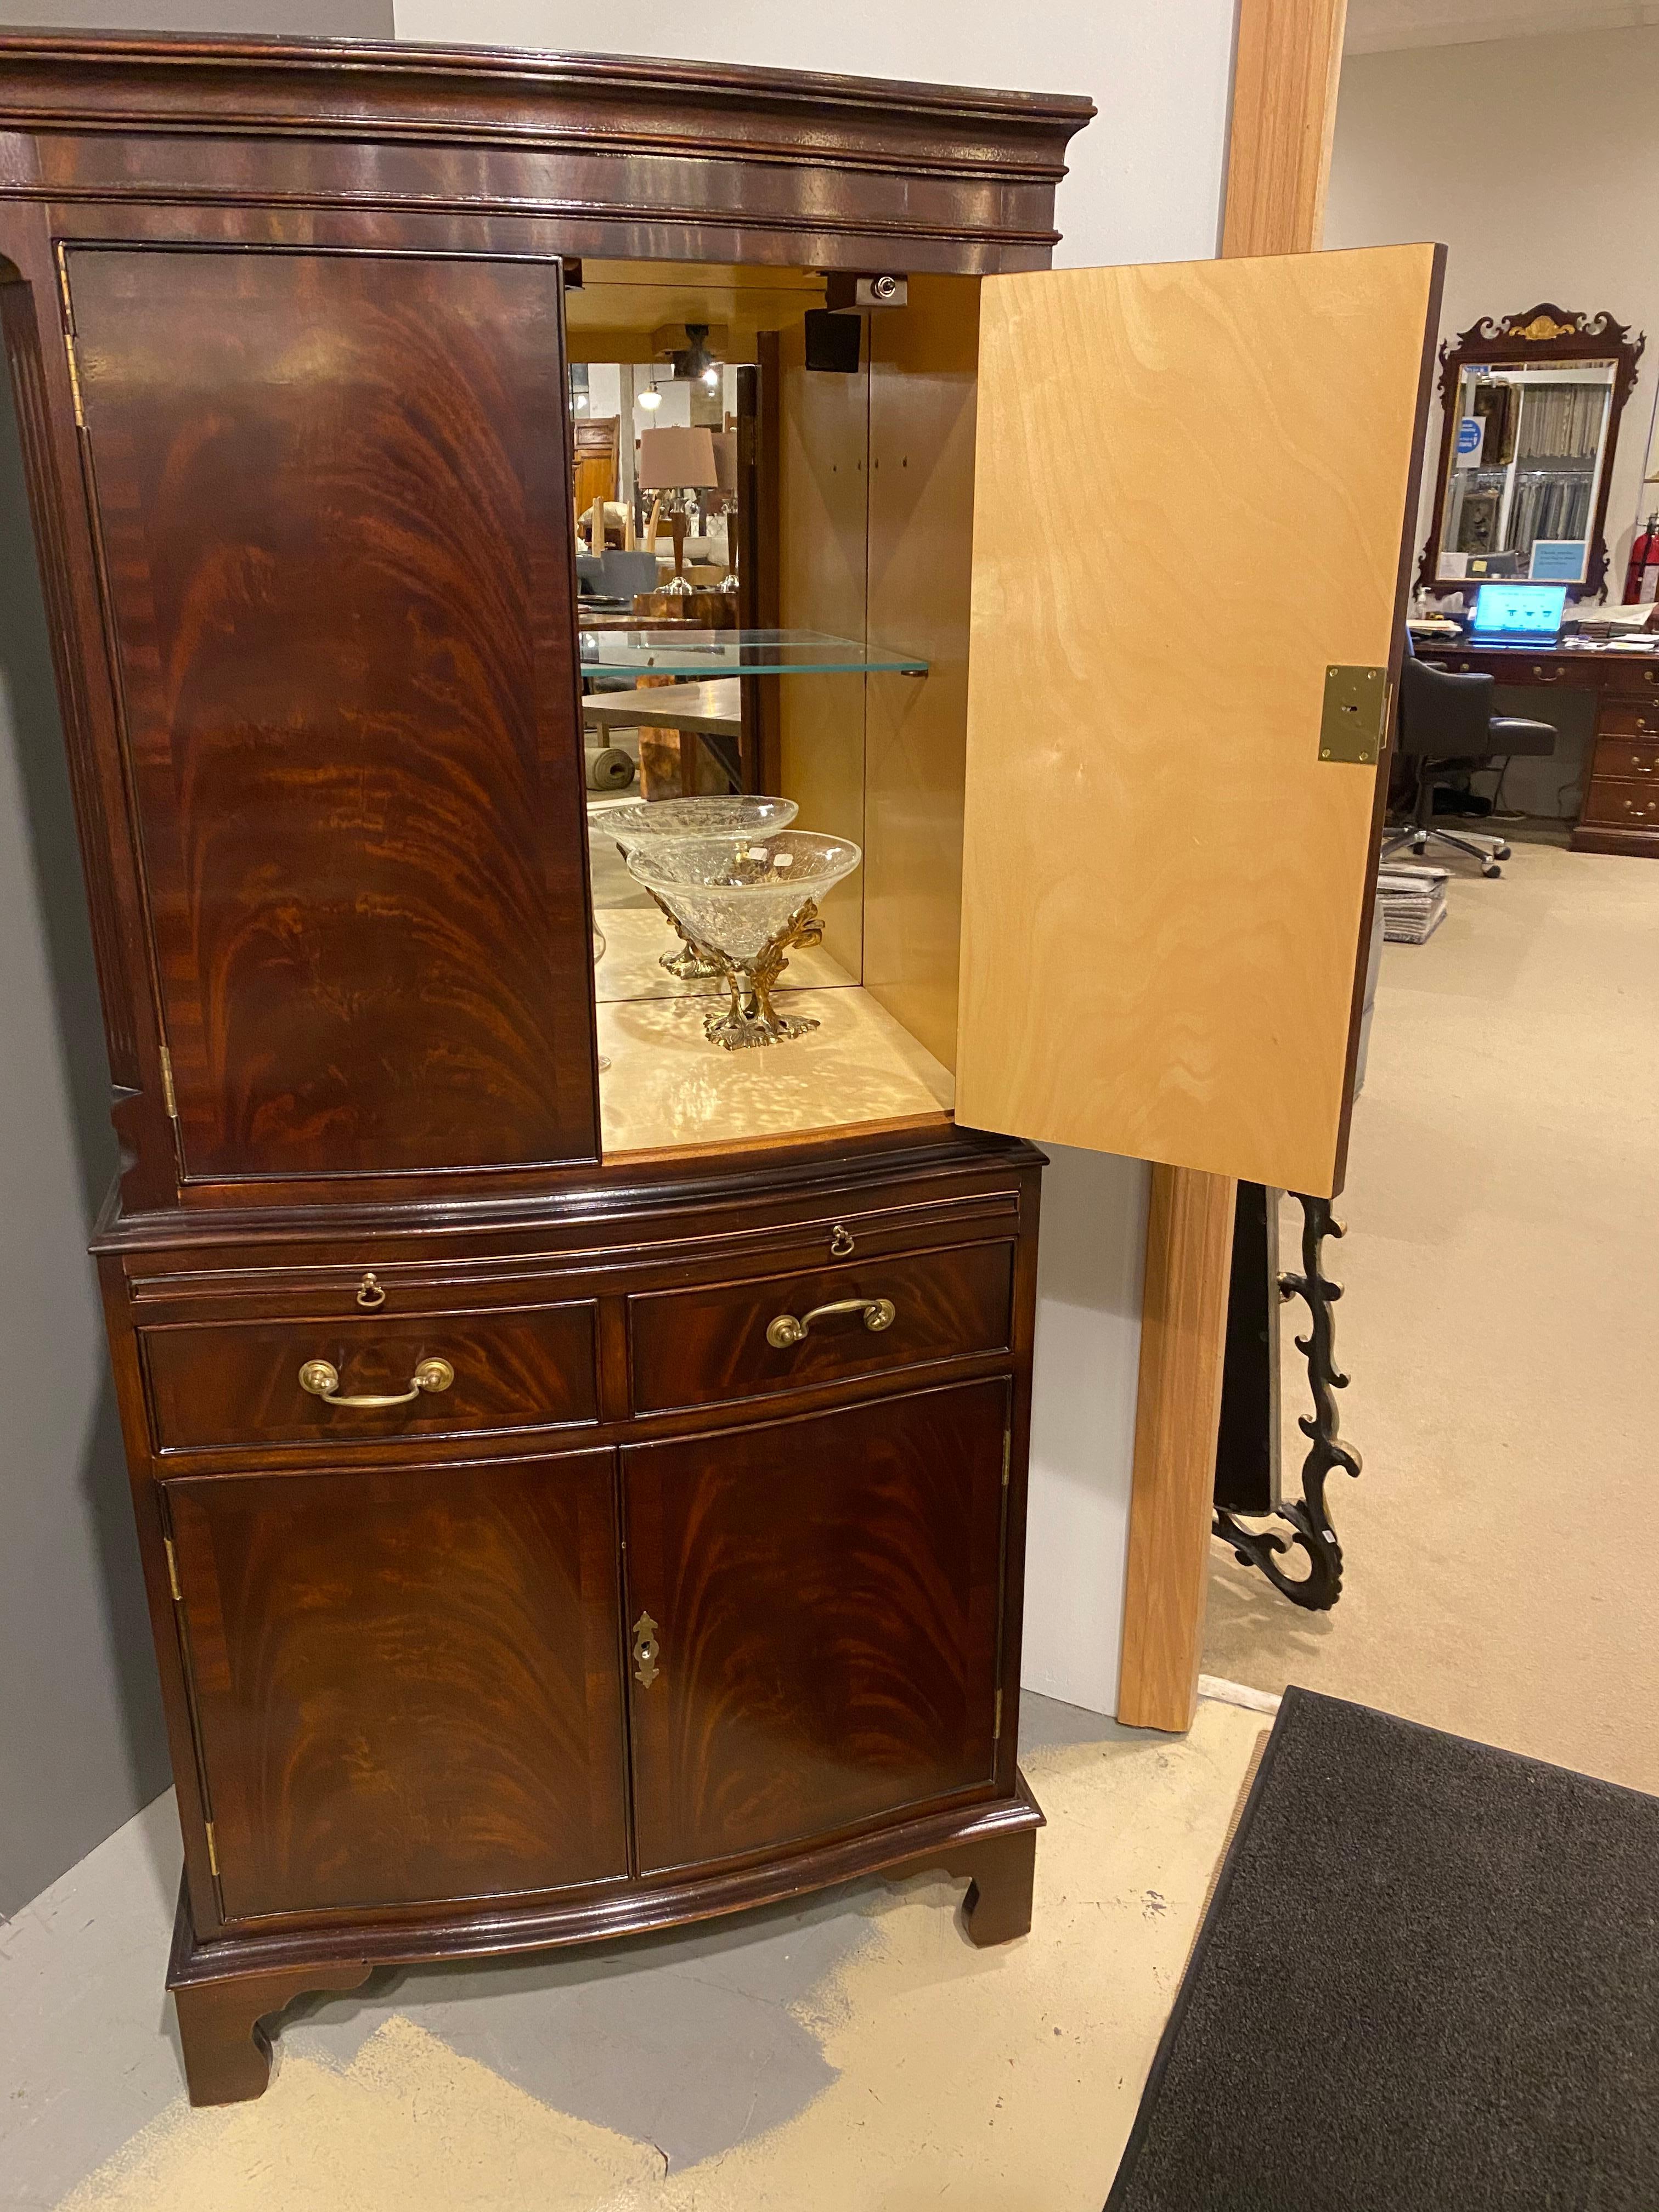 A mahogany dry bar or drinks cabinet crafted in mahogany, Georgian styled with a delicate serpentine curve to the front to give it a classic line. Beautiful contrasted interior of sycamore with a mirrored back and glass shelf displays what needs to